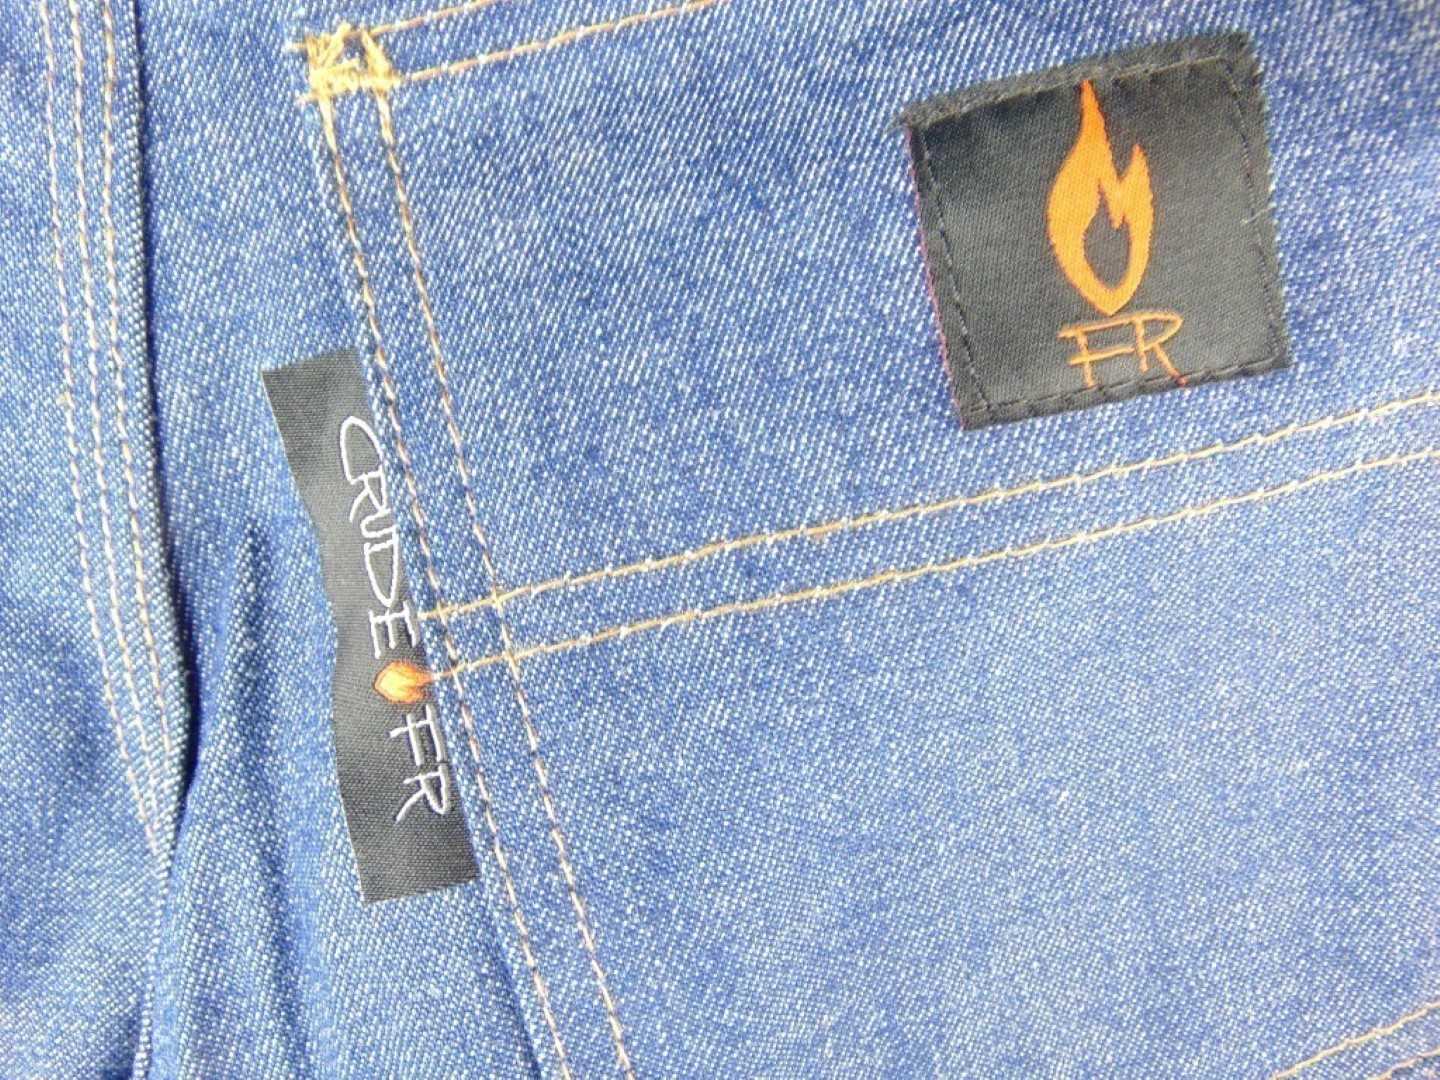 54x38U CRUDE FR / Flame Resistant Jeans (Unfinished Seam)